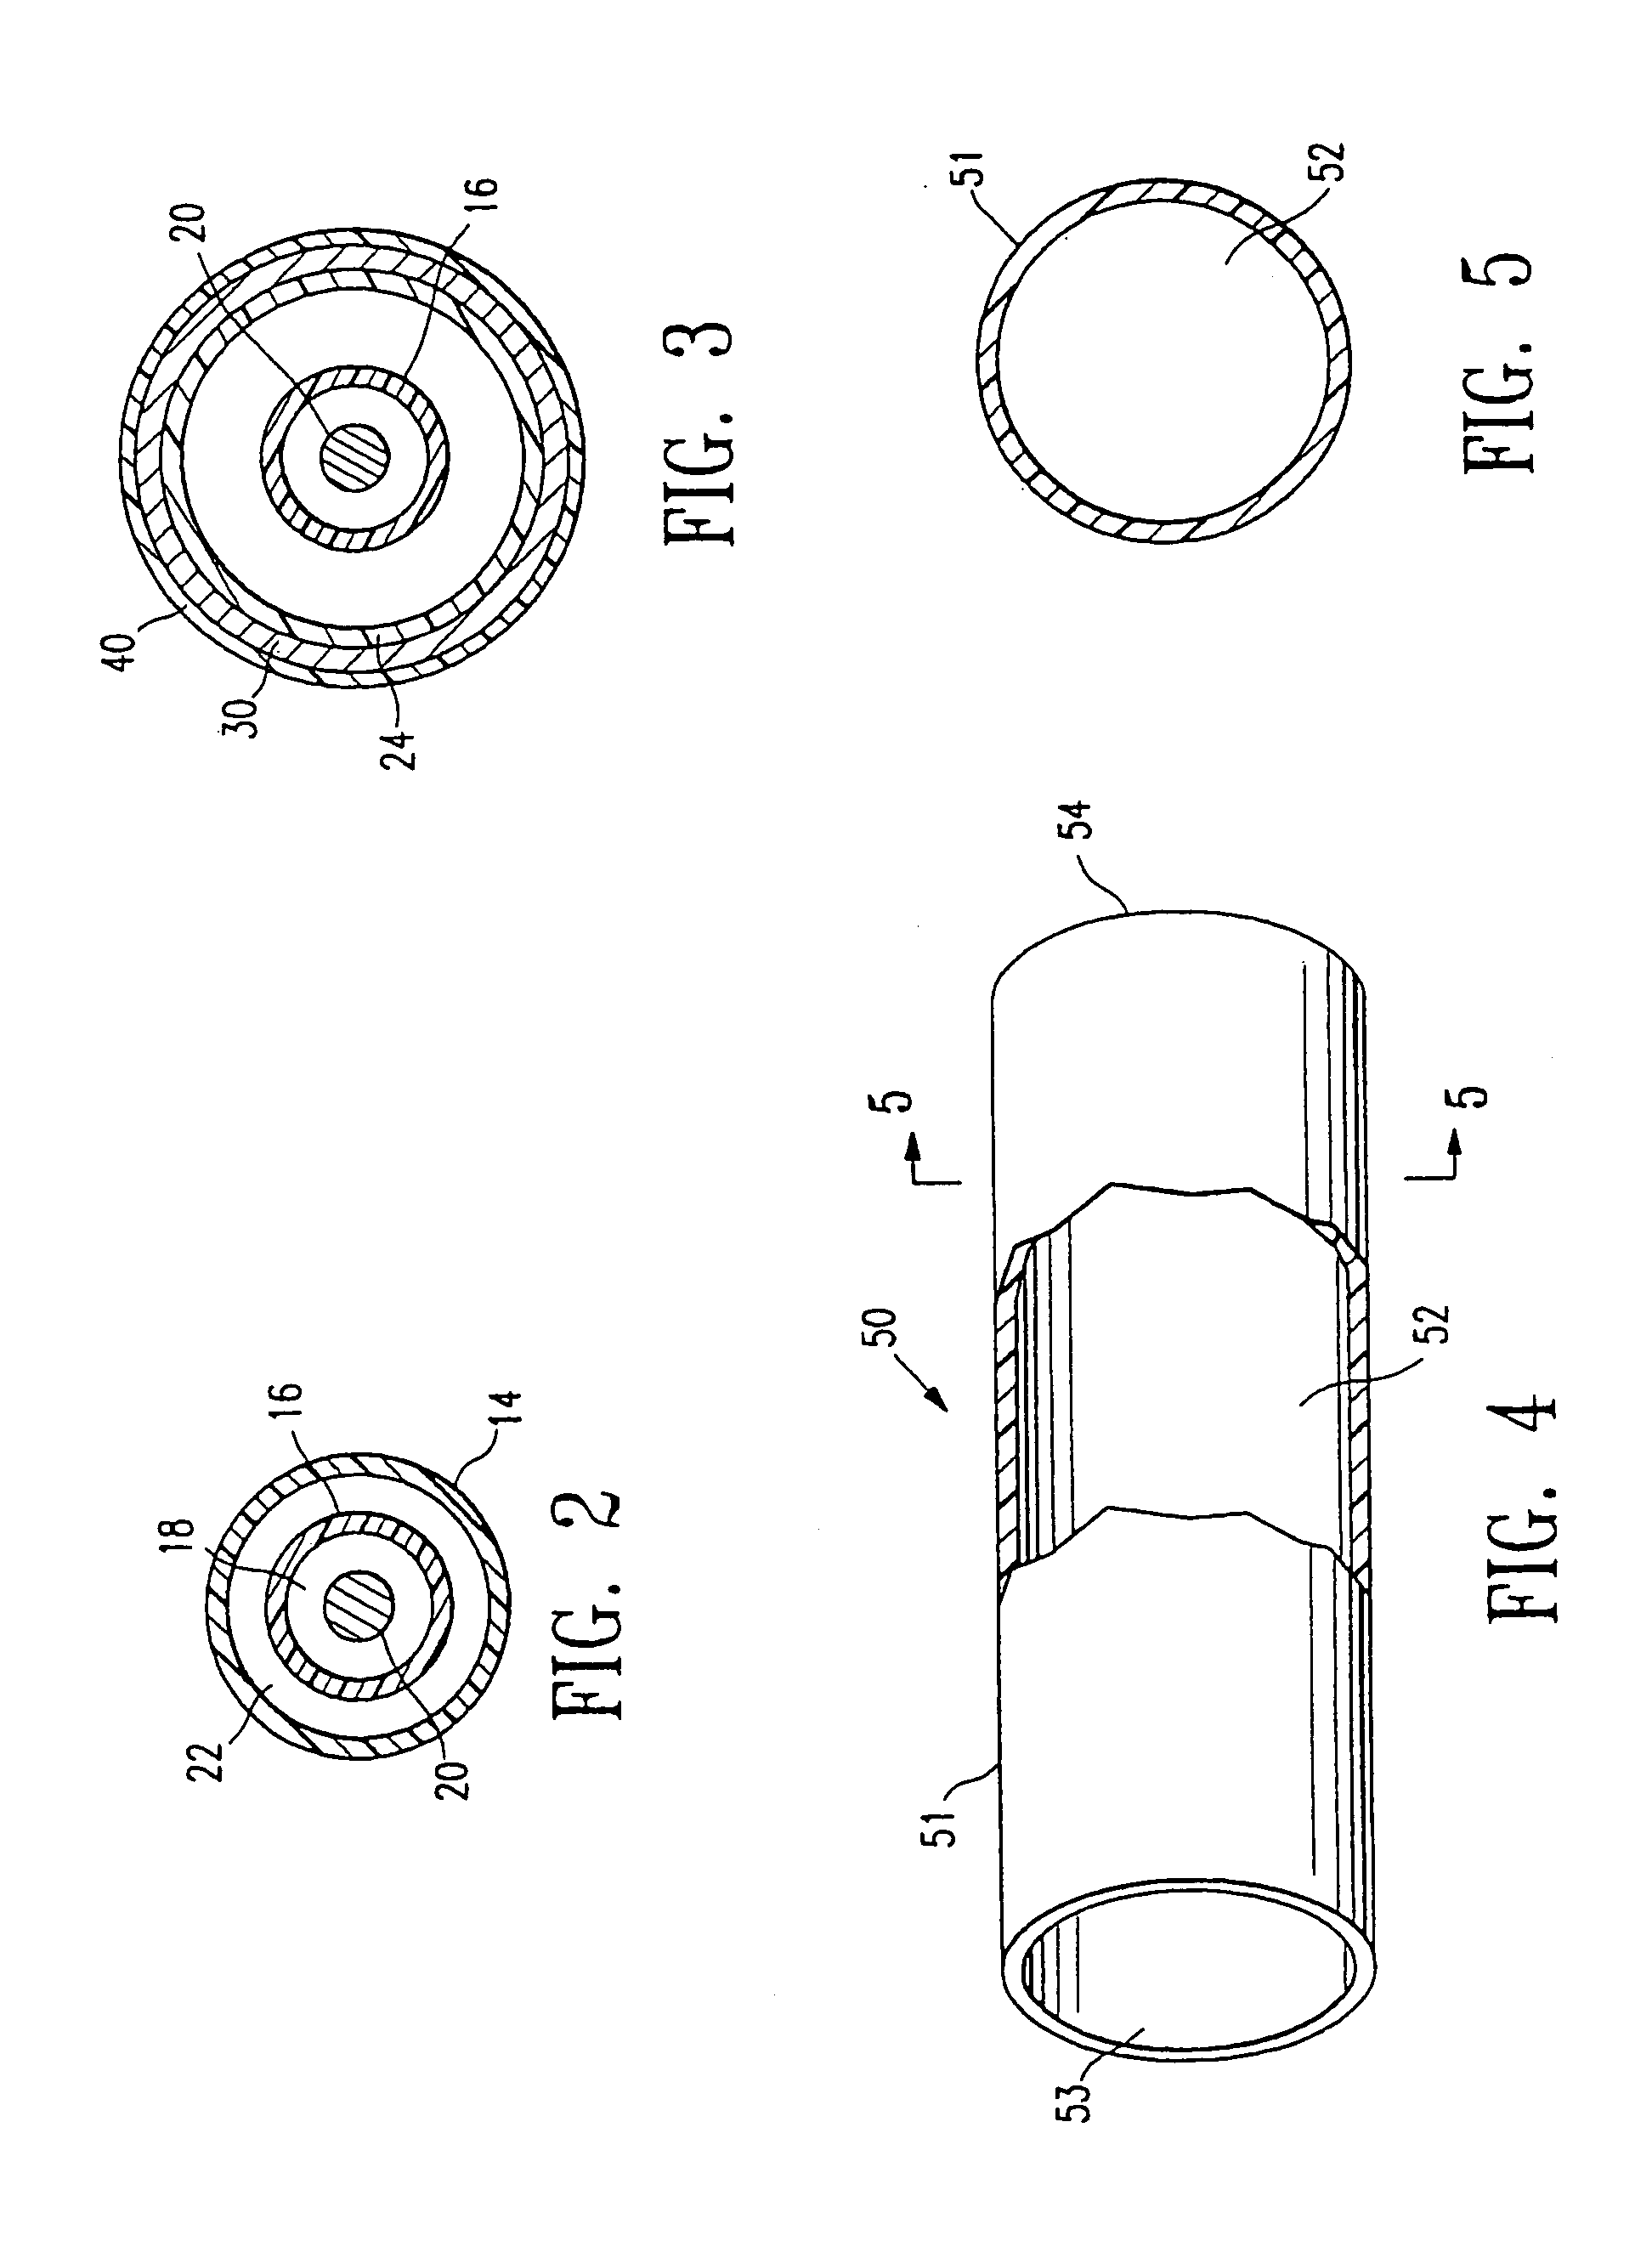 Medical device formed of polyester copolymer